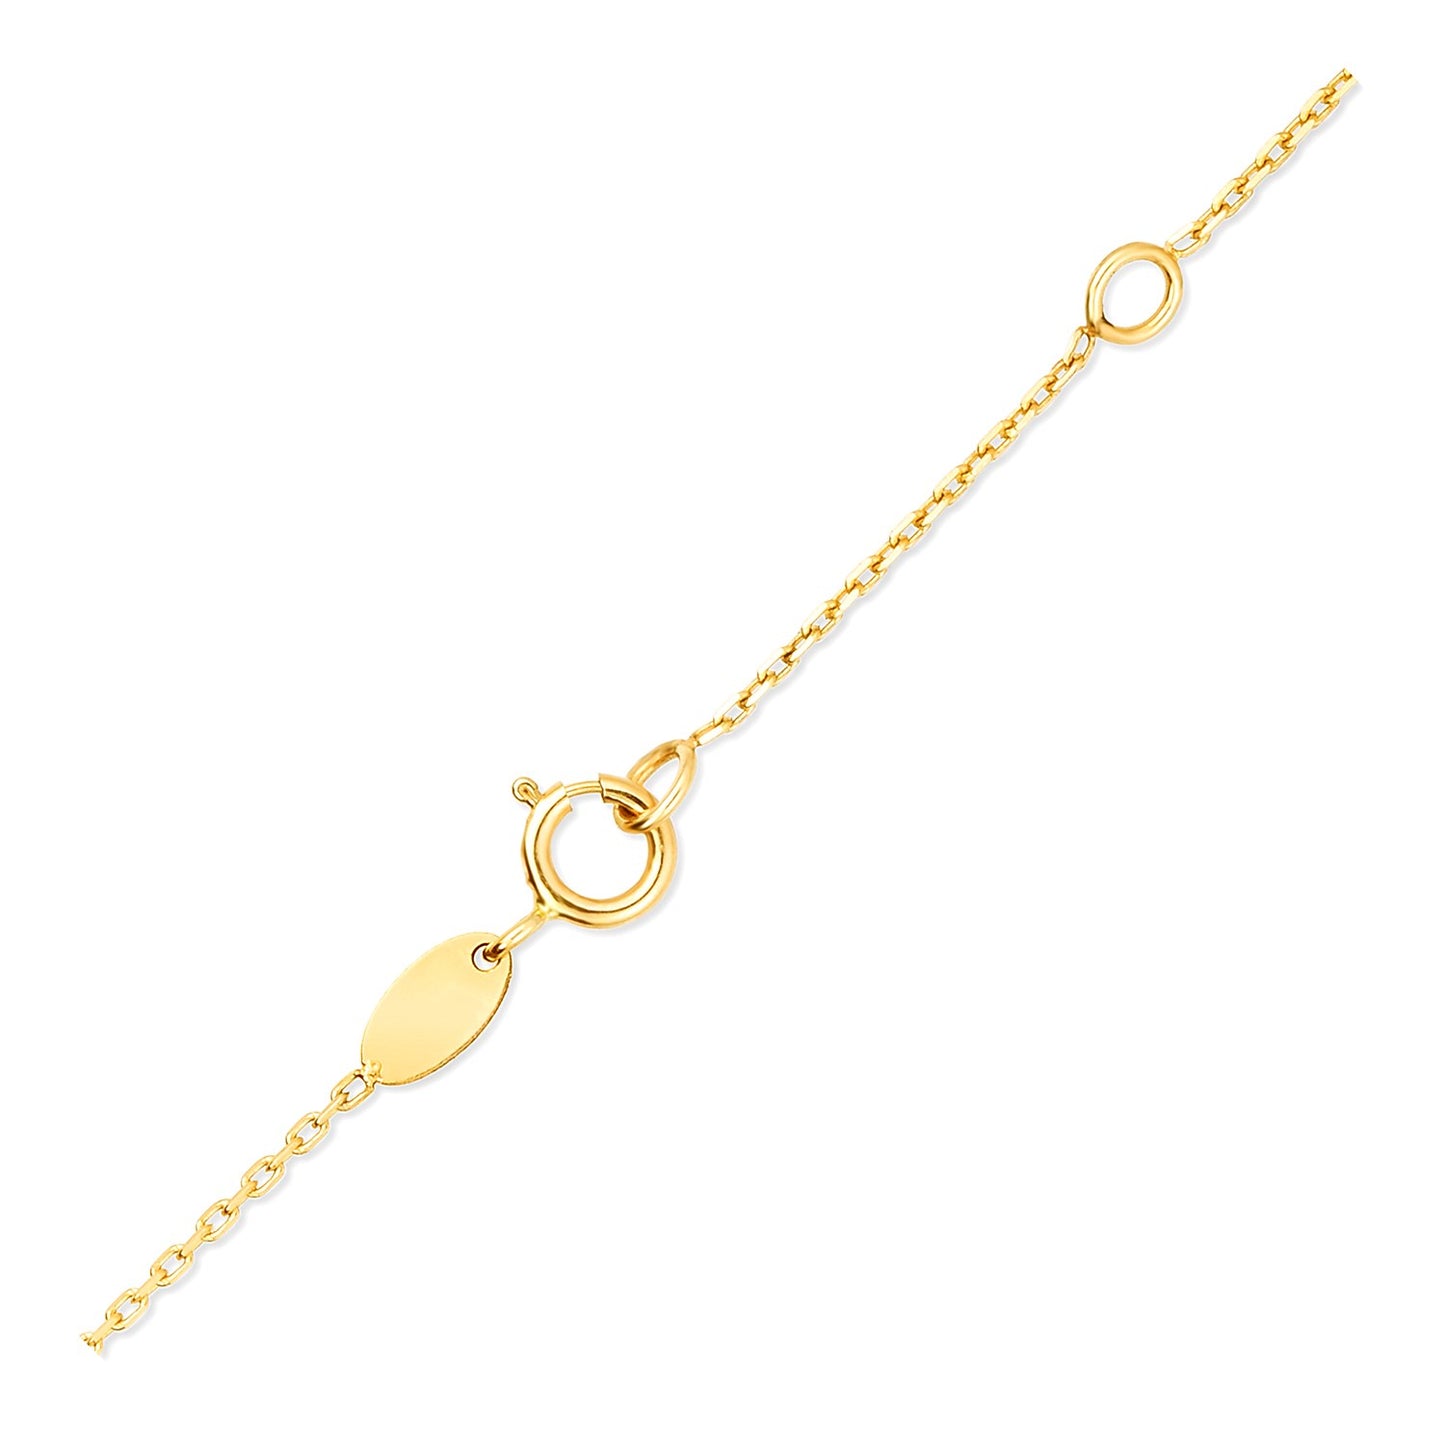 14k Yellow Gold Chain Necklace with Cross Stations